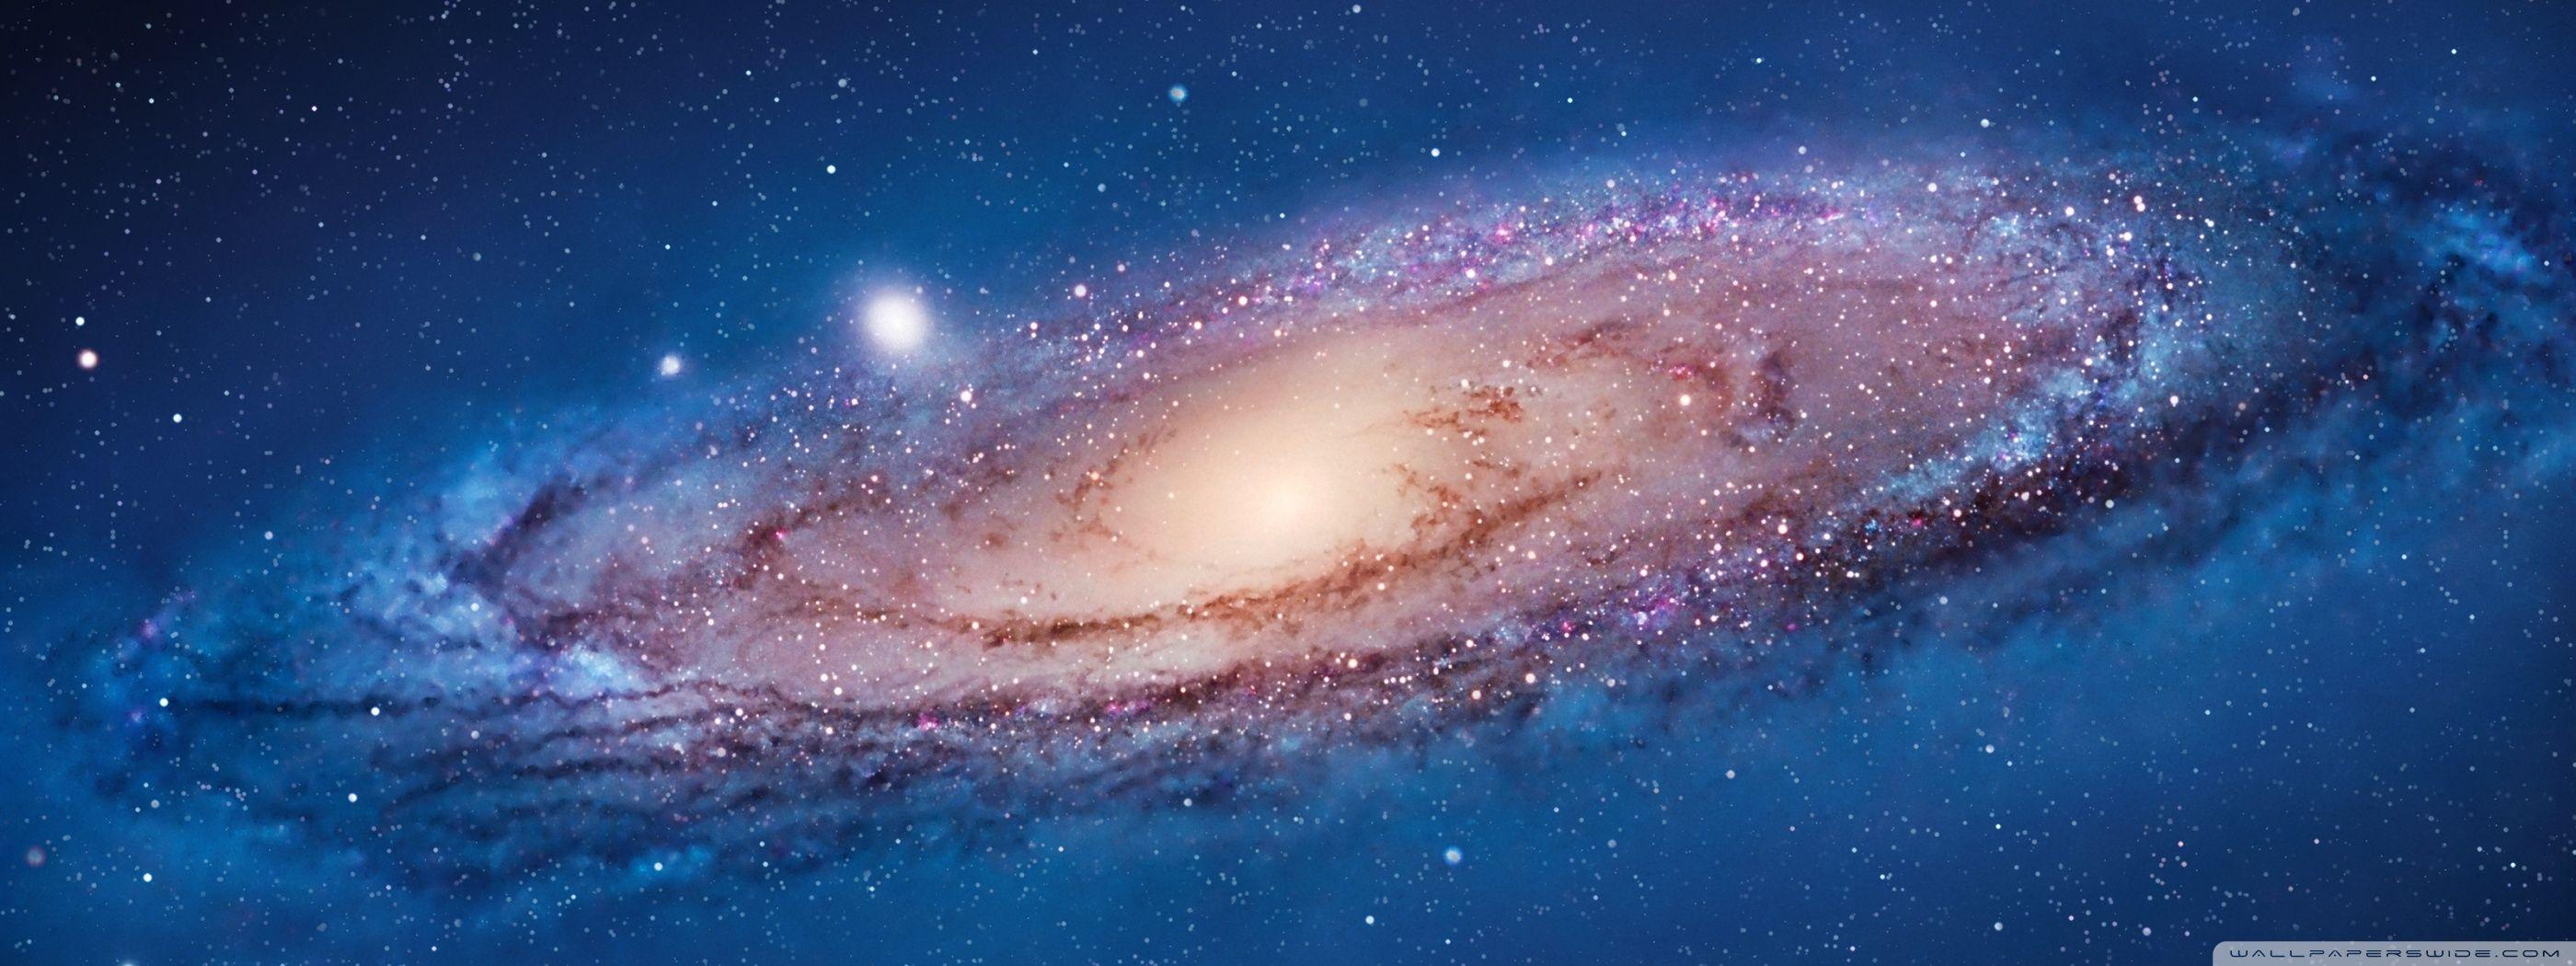 Universe Photos, Download The BEST Free Universe Stock Photos & HD Images